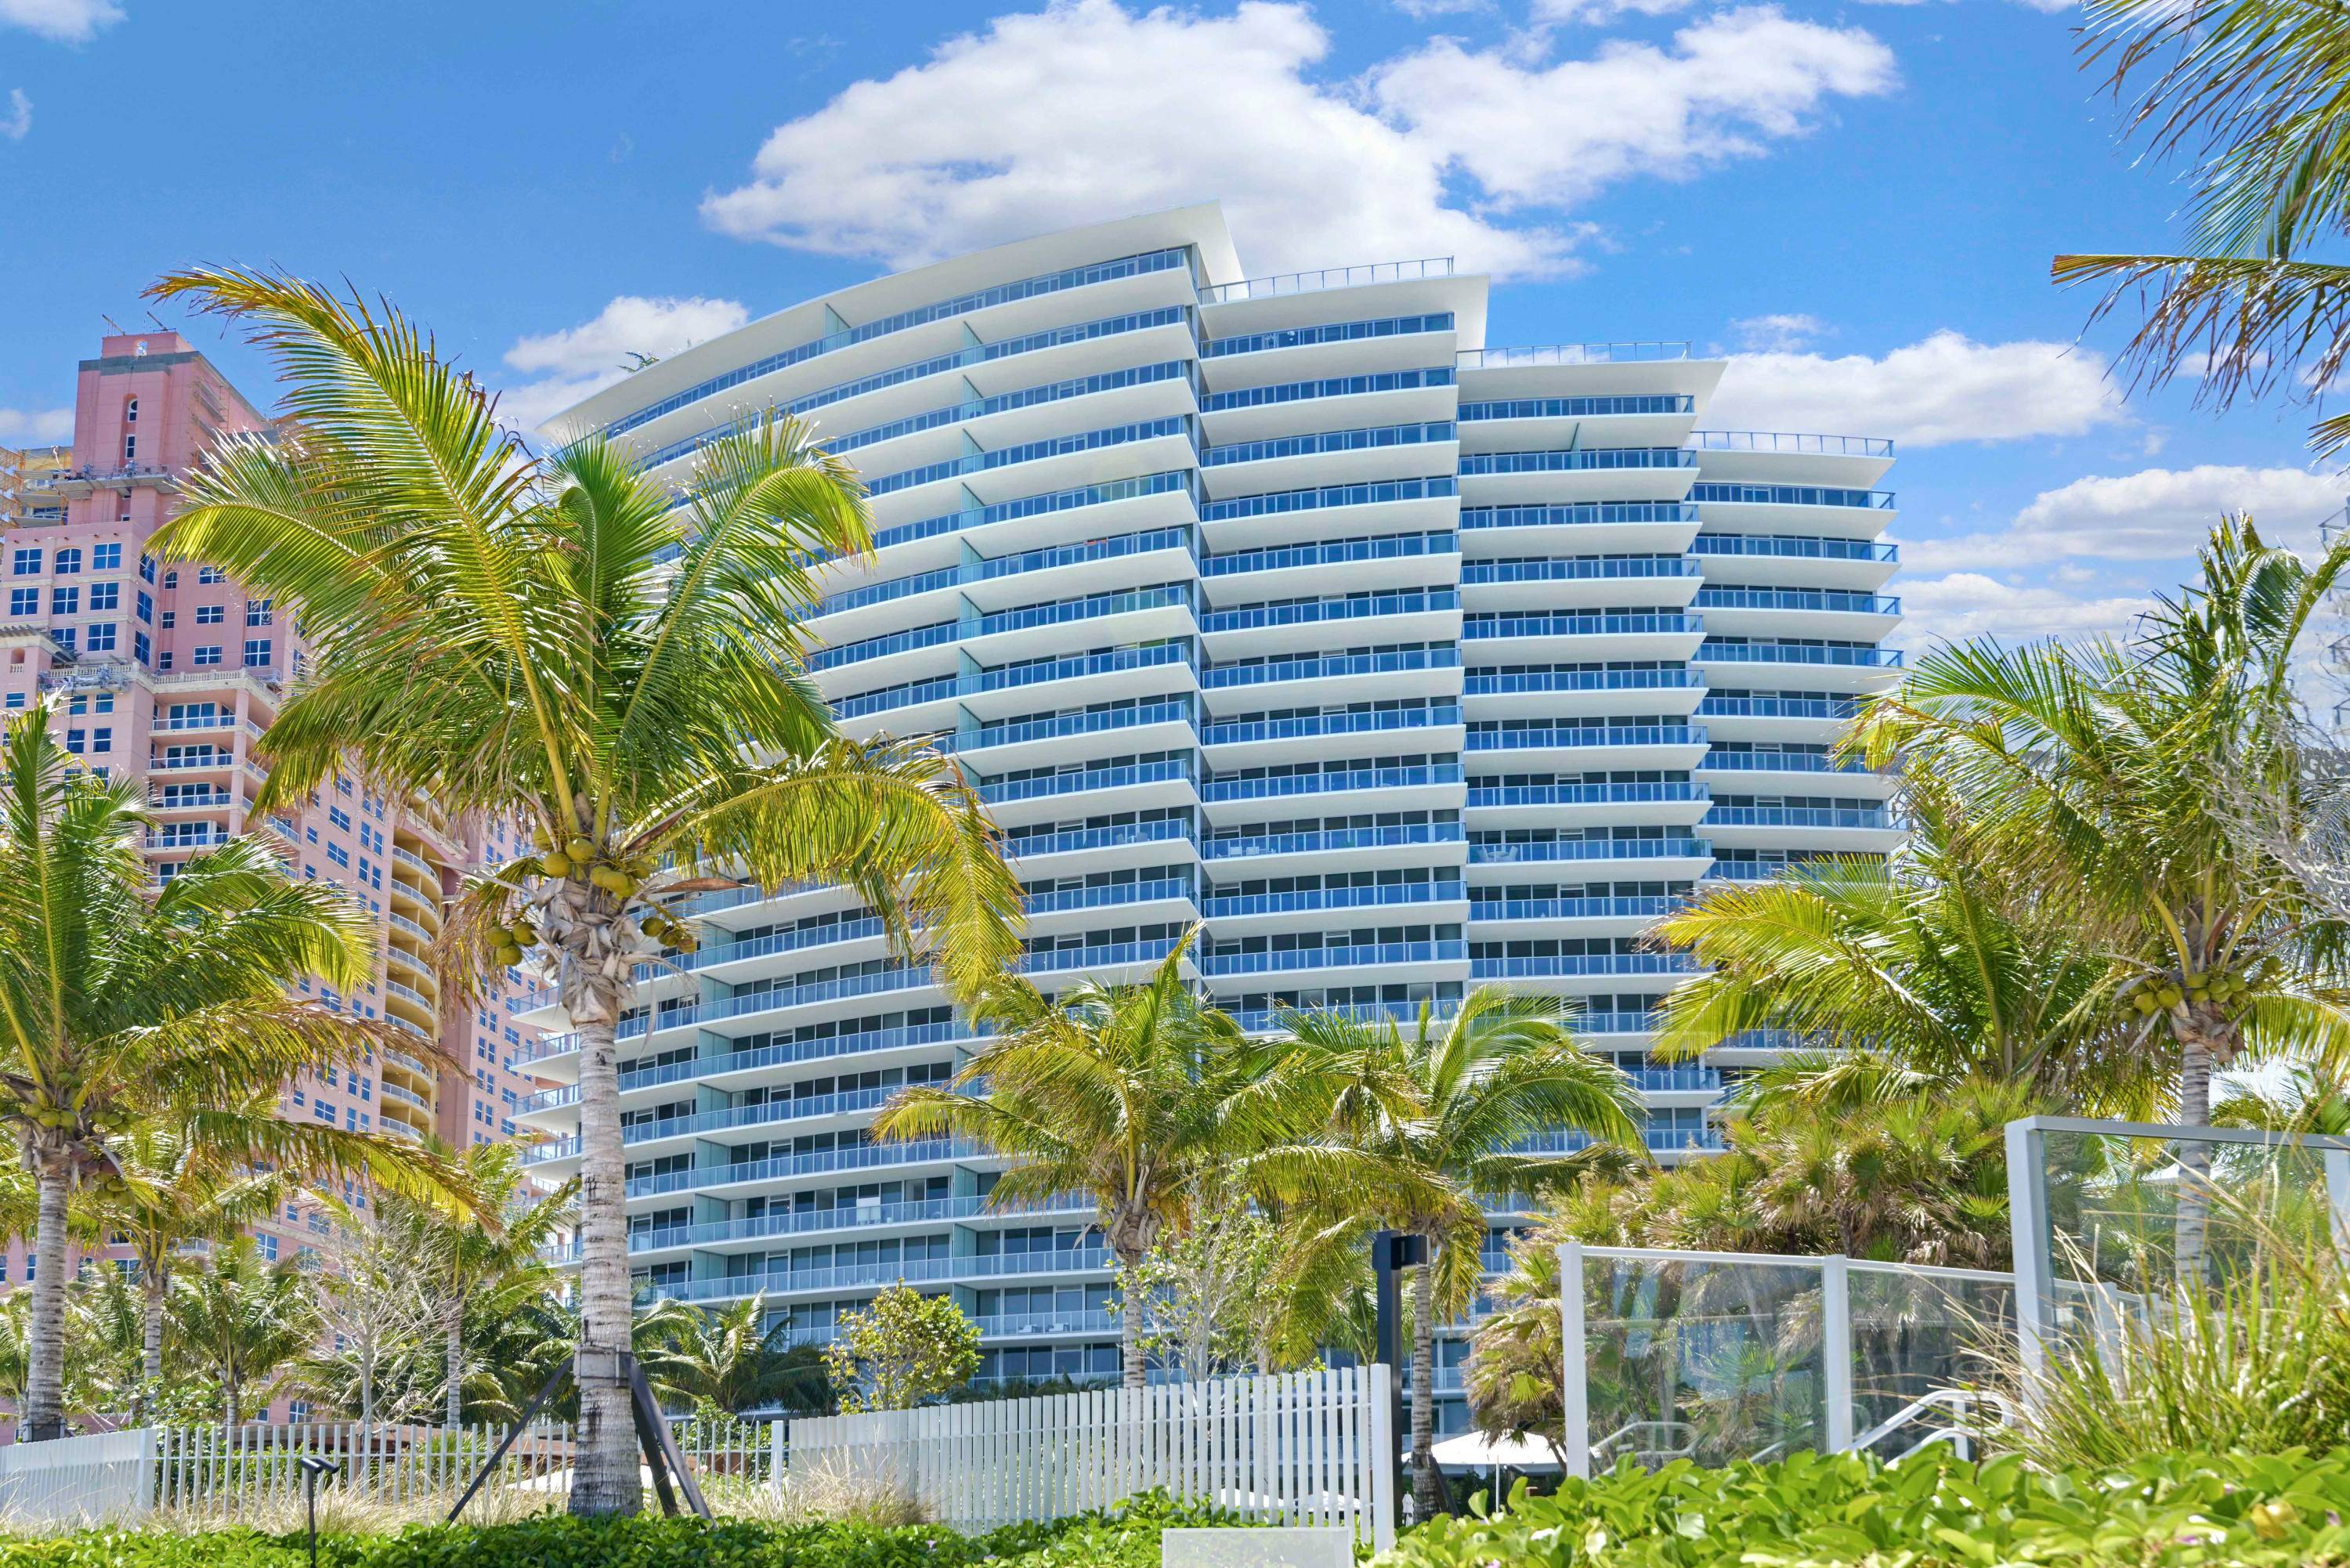 Bright and beautiful beach corner residence located at the elegant and charming Auberge, with incredible ocean and city views from every window, 3 bedrooms, plus den, 3 1 2 bathrooms, ...